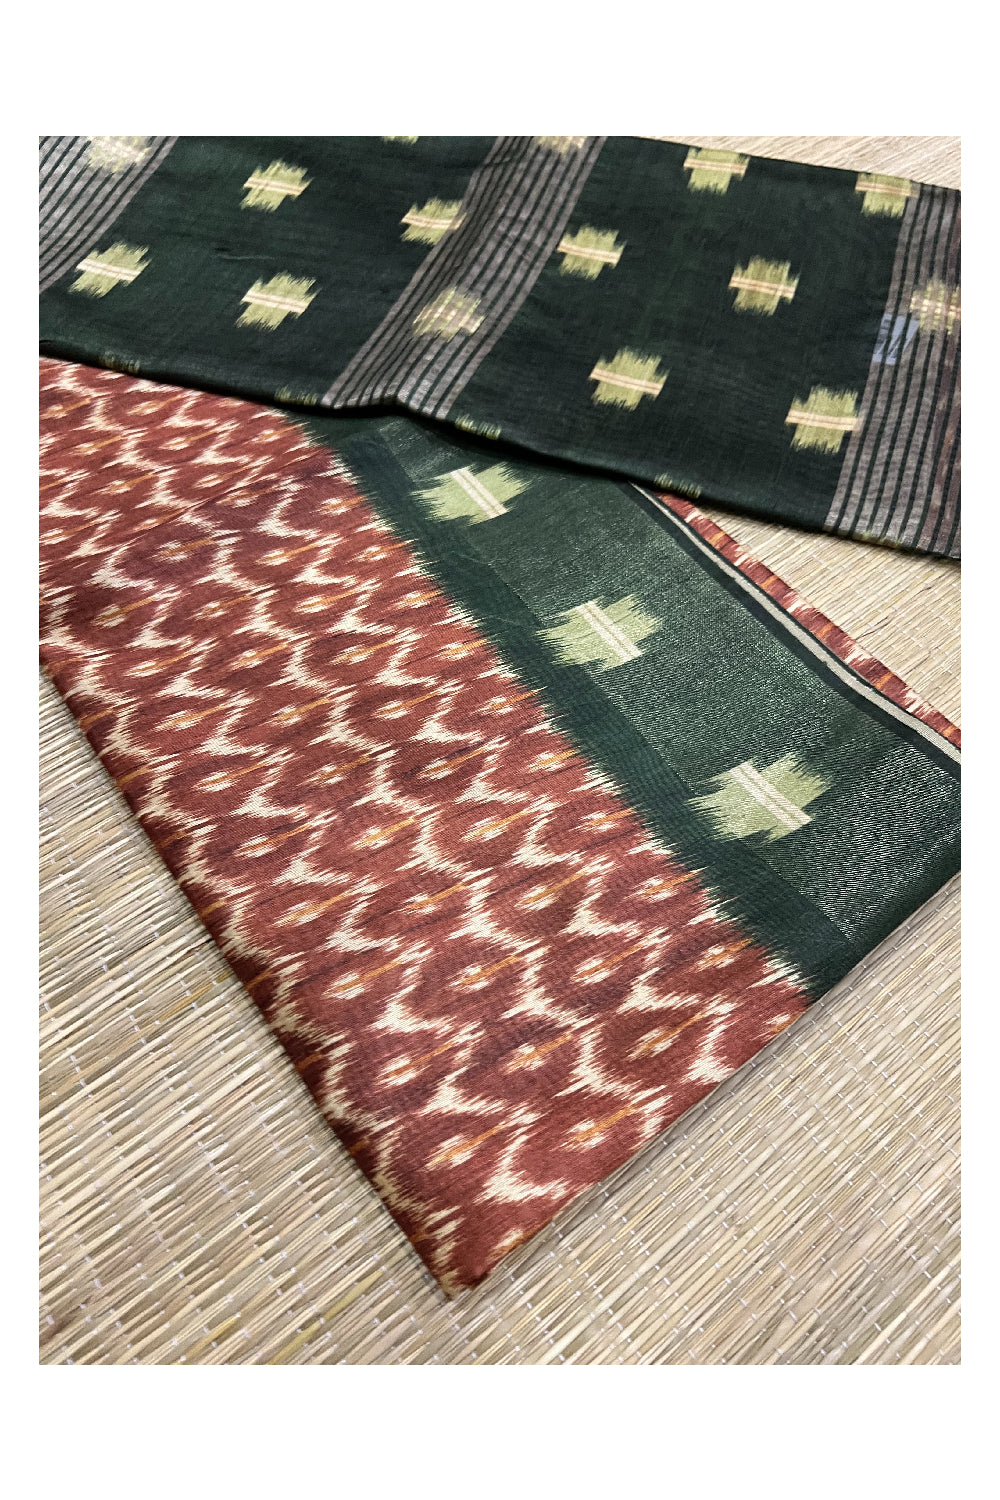 Southloom Tussar Silk Pochampally Themed Brown and White Printed Saree